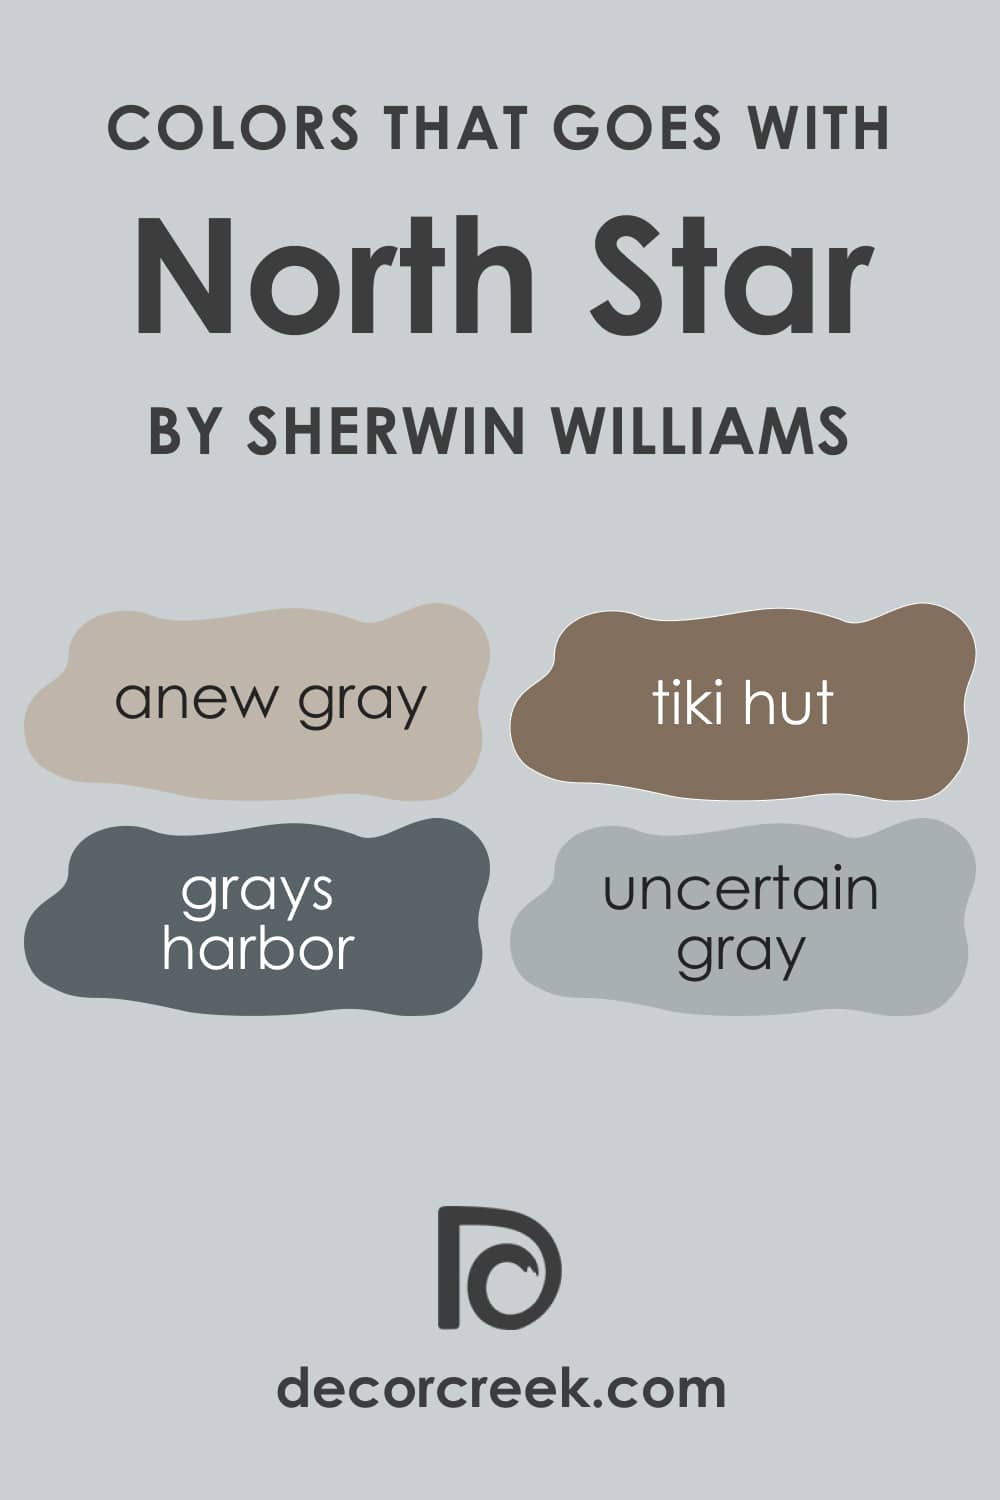 Colors That Go With SW North Star Color